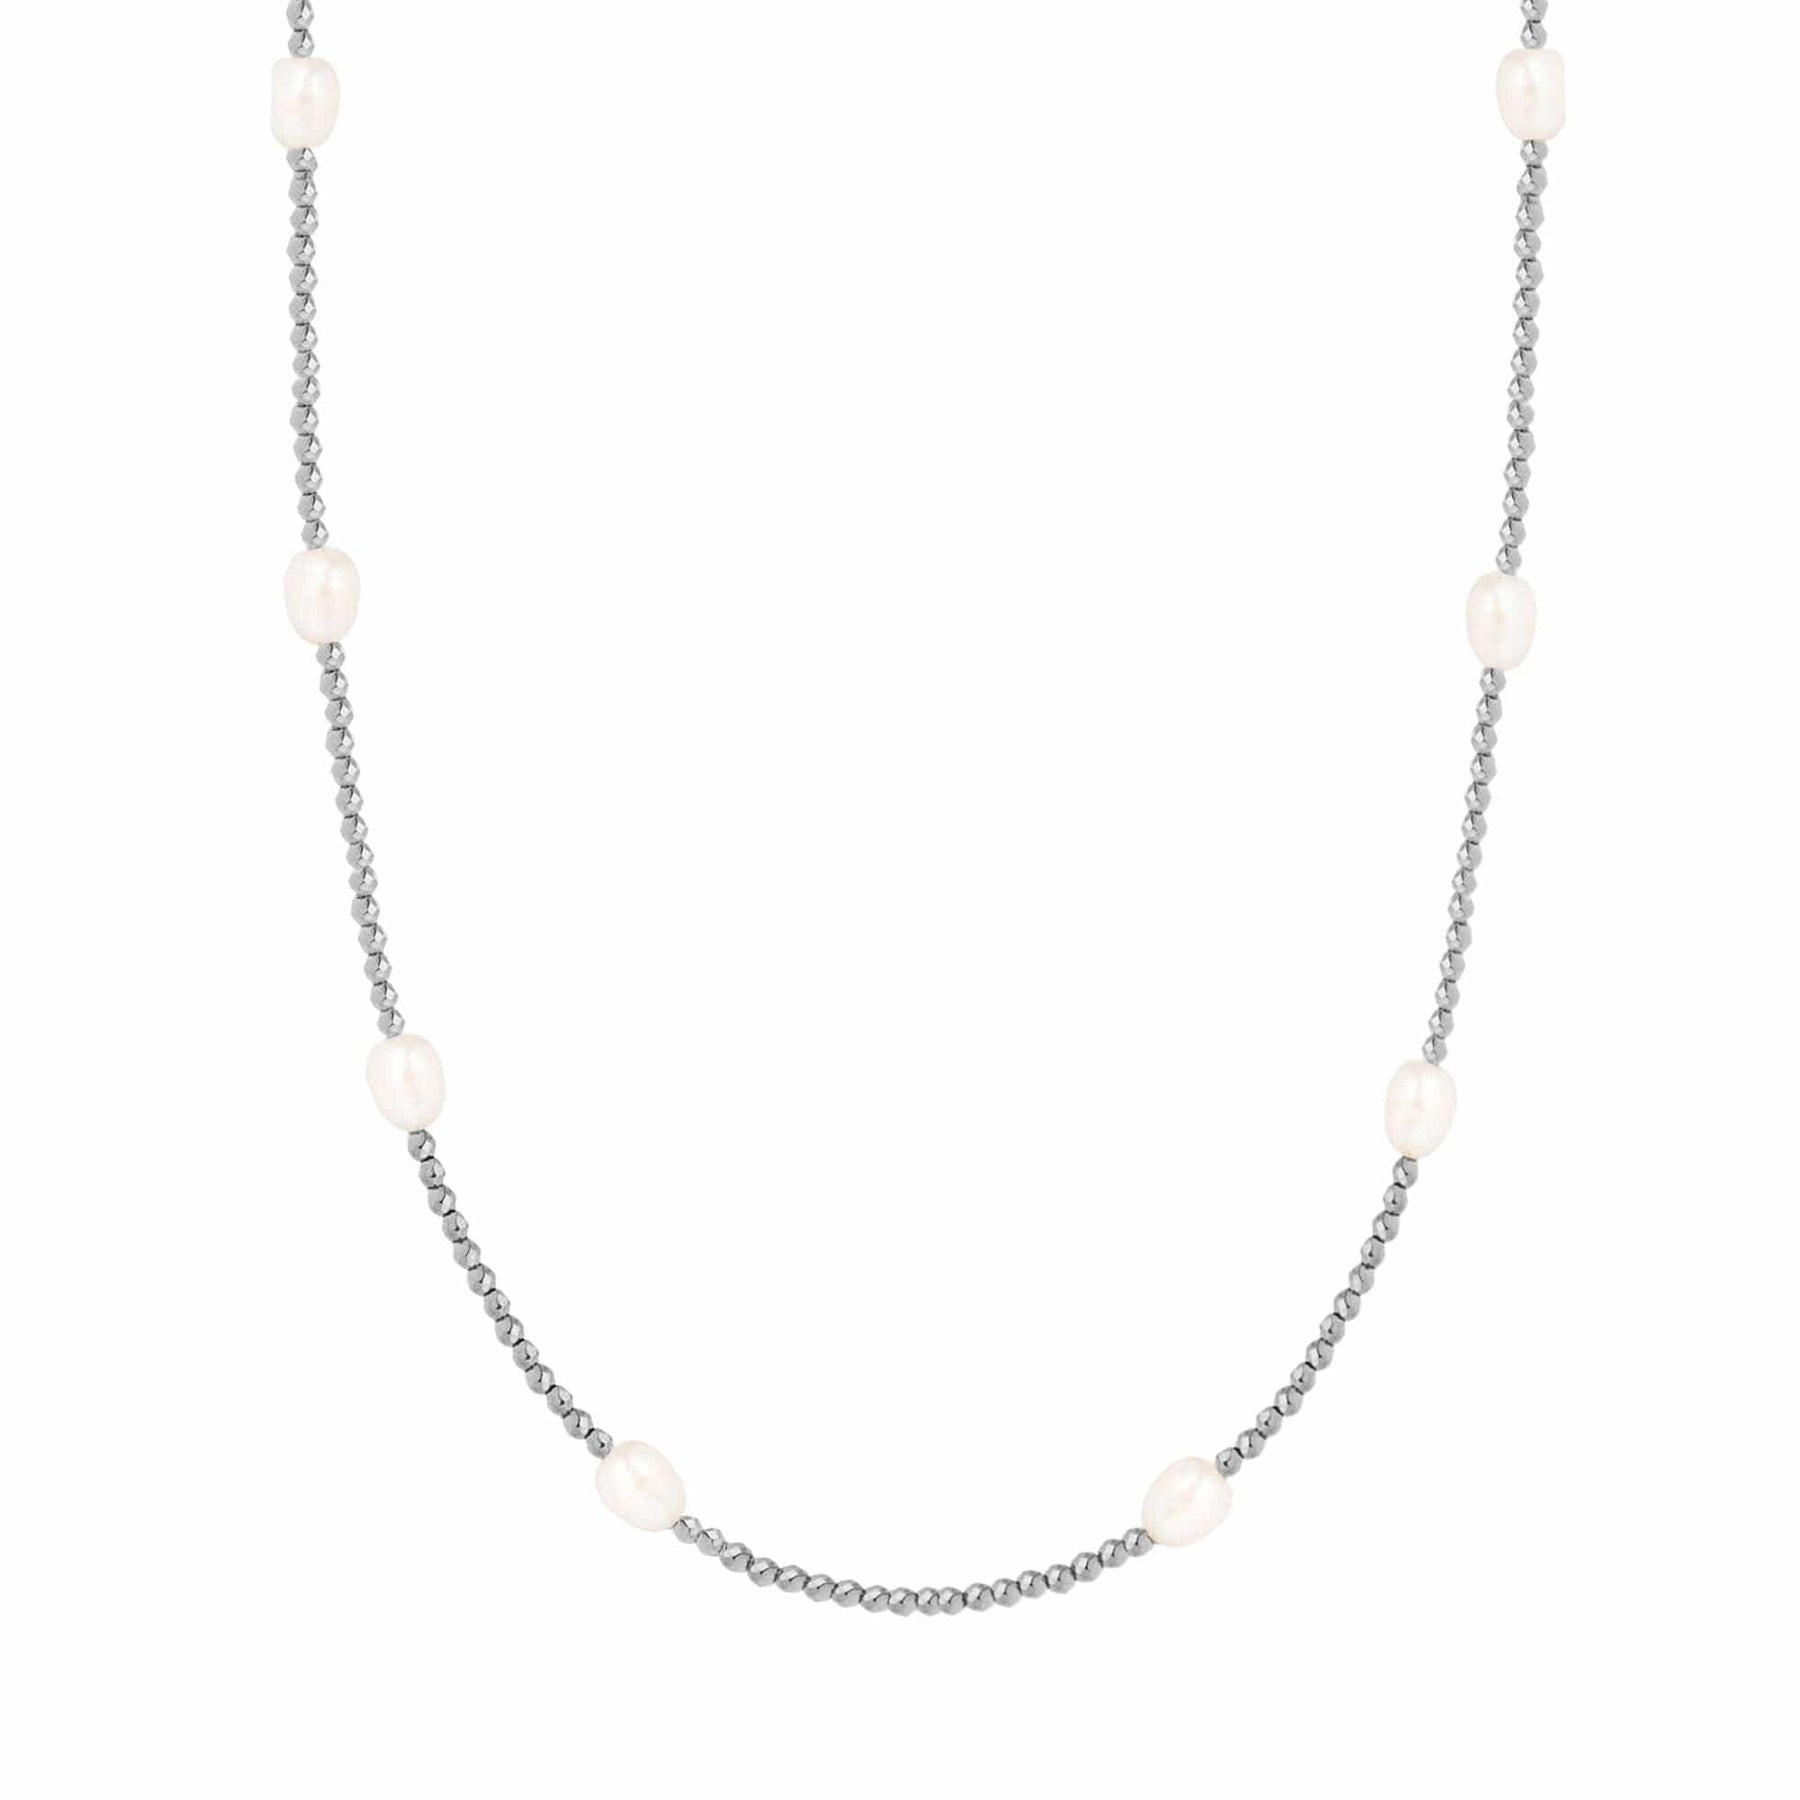 BohoMoon Stainless Steel Blaine Pearl Necklace